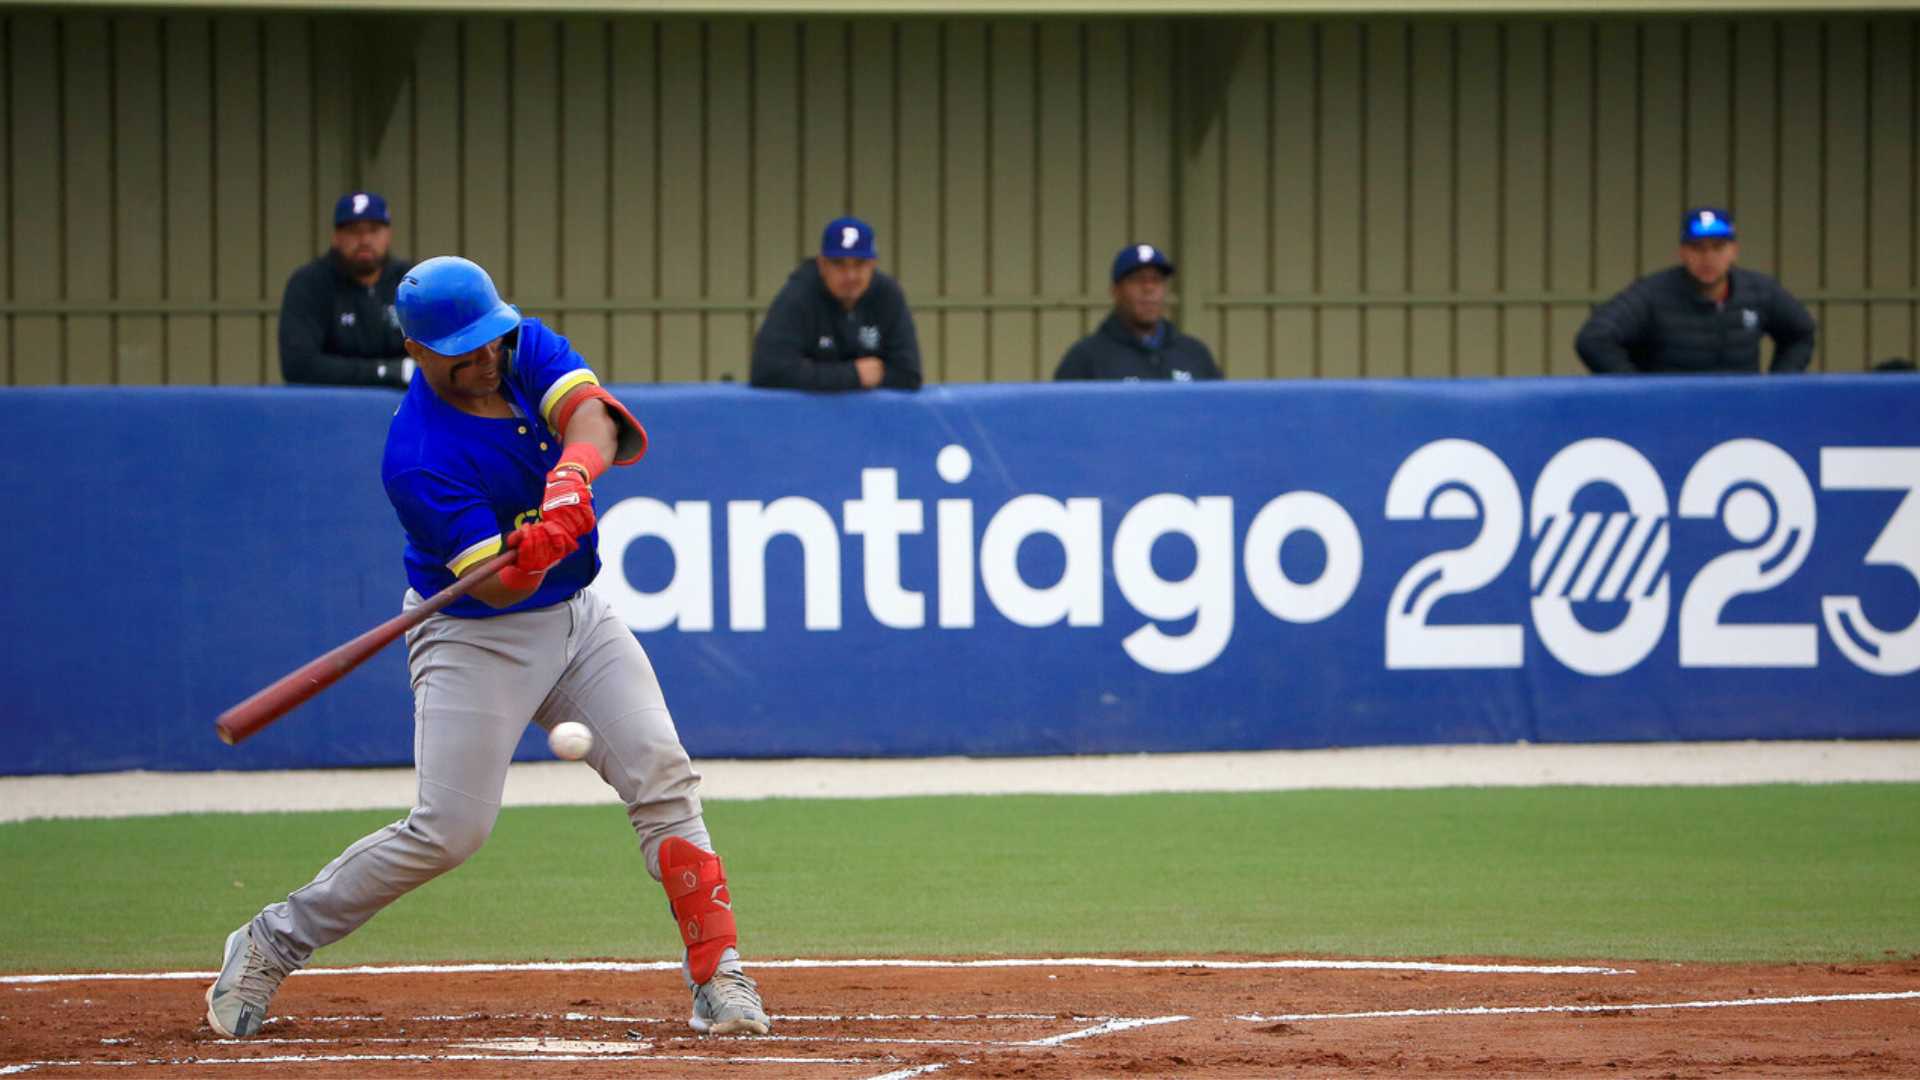 Colombia beats Panama and will compete with Brazil for the gold in baseball